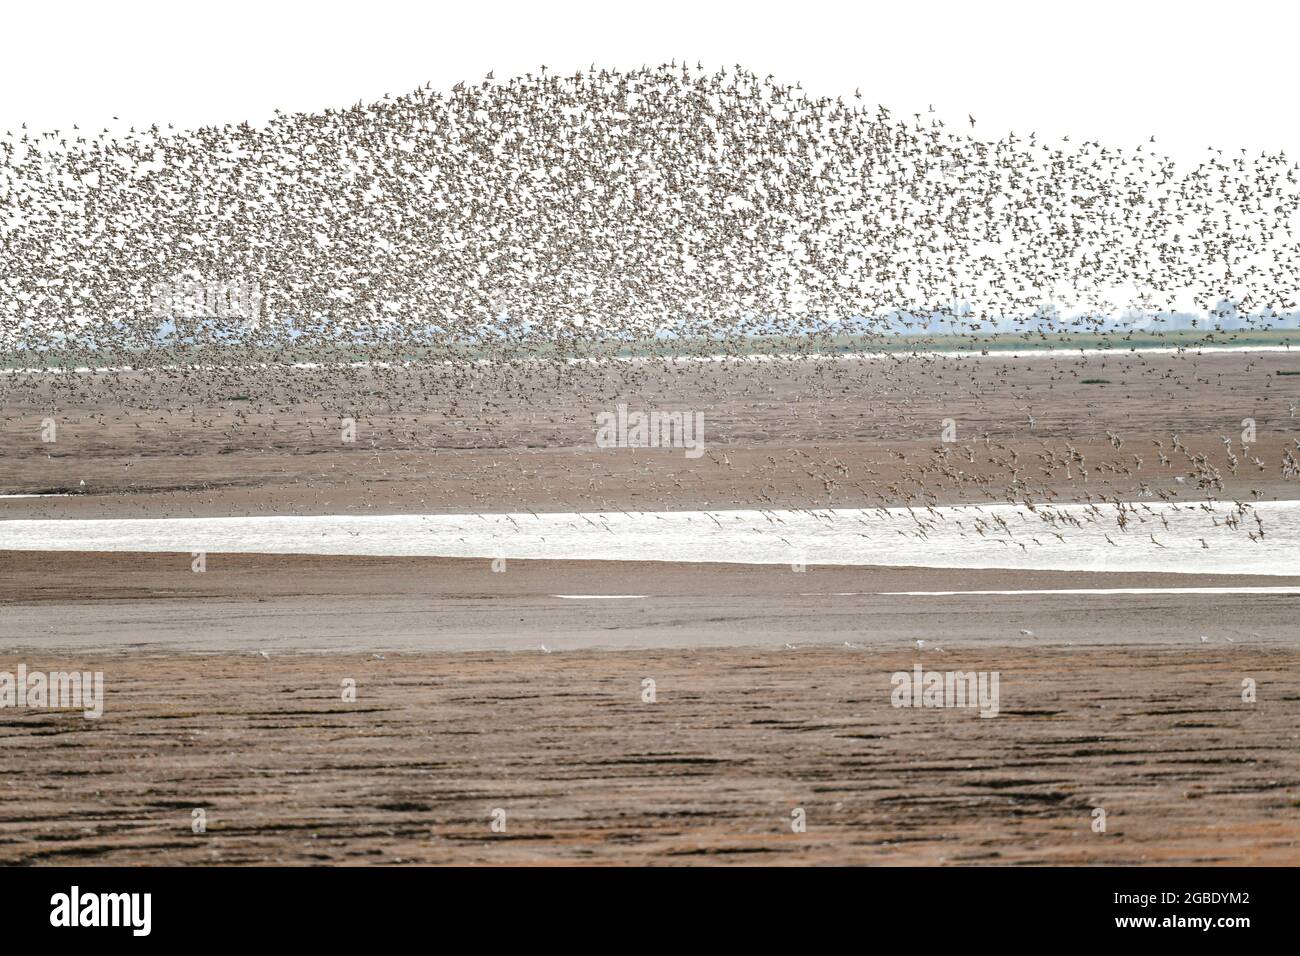 3rd of August 2021. The spectacle of Knots flying over The Wash at Snettisham always brings out the bird watchers. This however is not known as a murmuration, that applies to starlings. Stock Photo